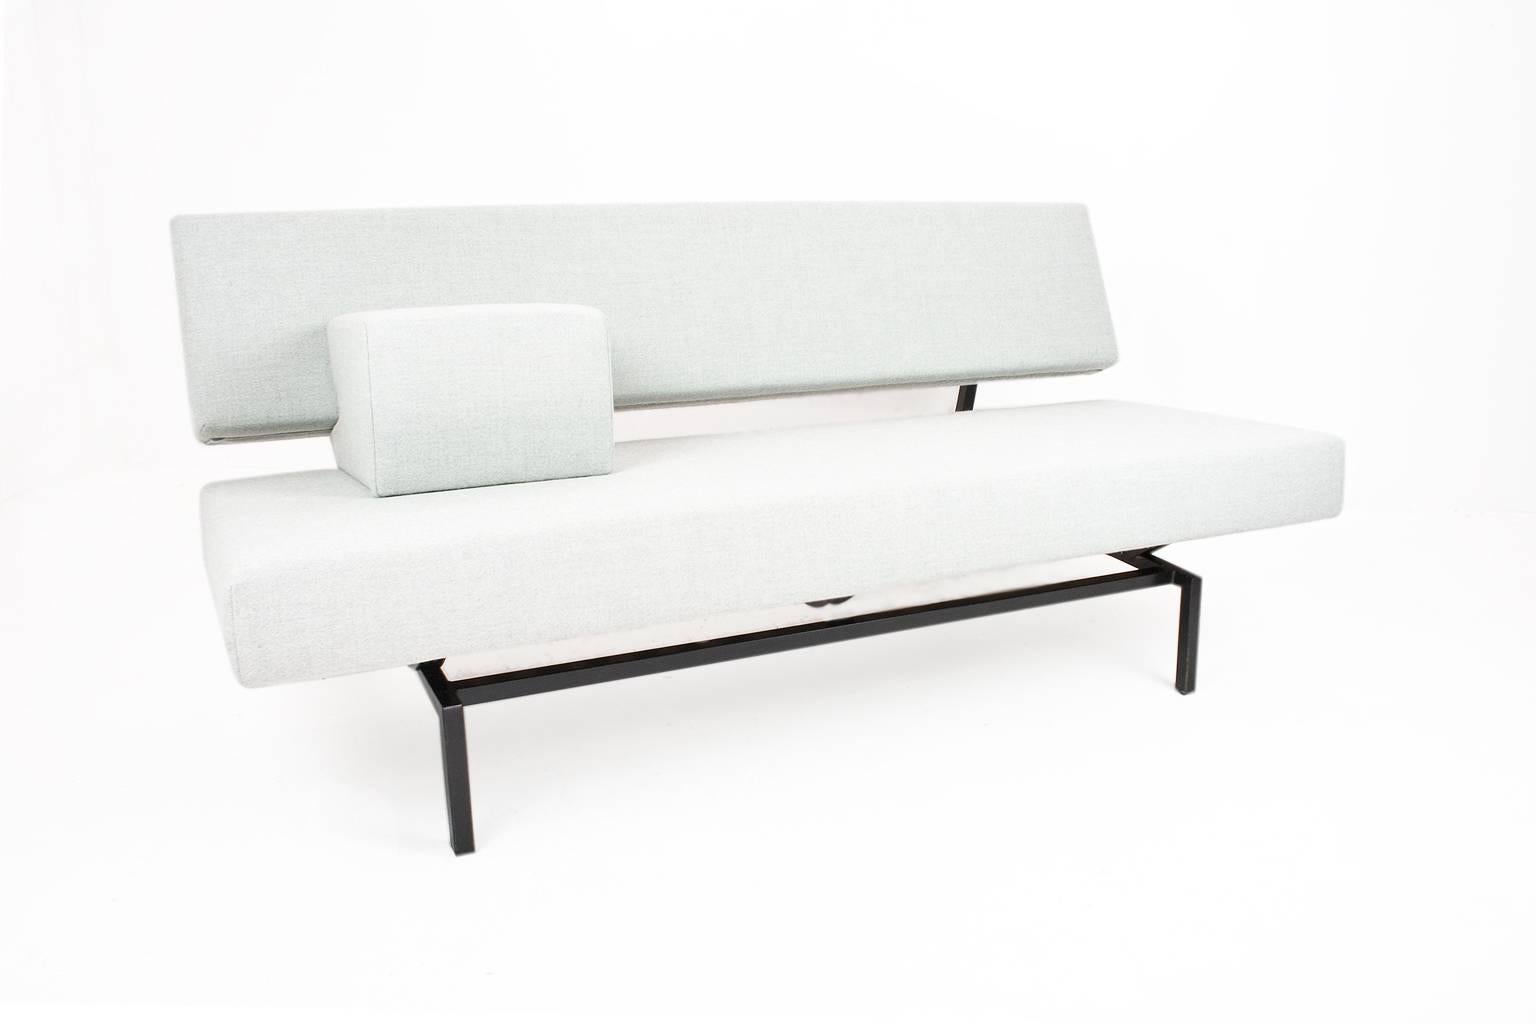 New upholstered Mid-Century Dutch modern sofa, model BZ53 by Martin Visser for 't Spectrum, collection 1964-1971. 

The BZ53 is the petit version of the BR03 and BR02 series, although the BZ53 is not a day bed. This sofa is 160cm wide. New foam